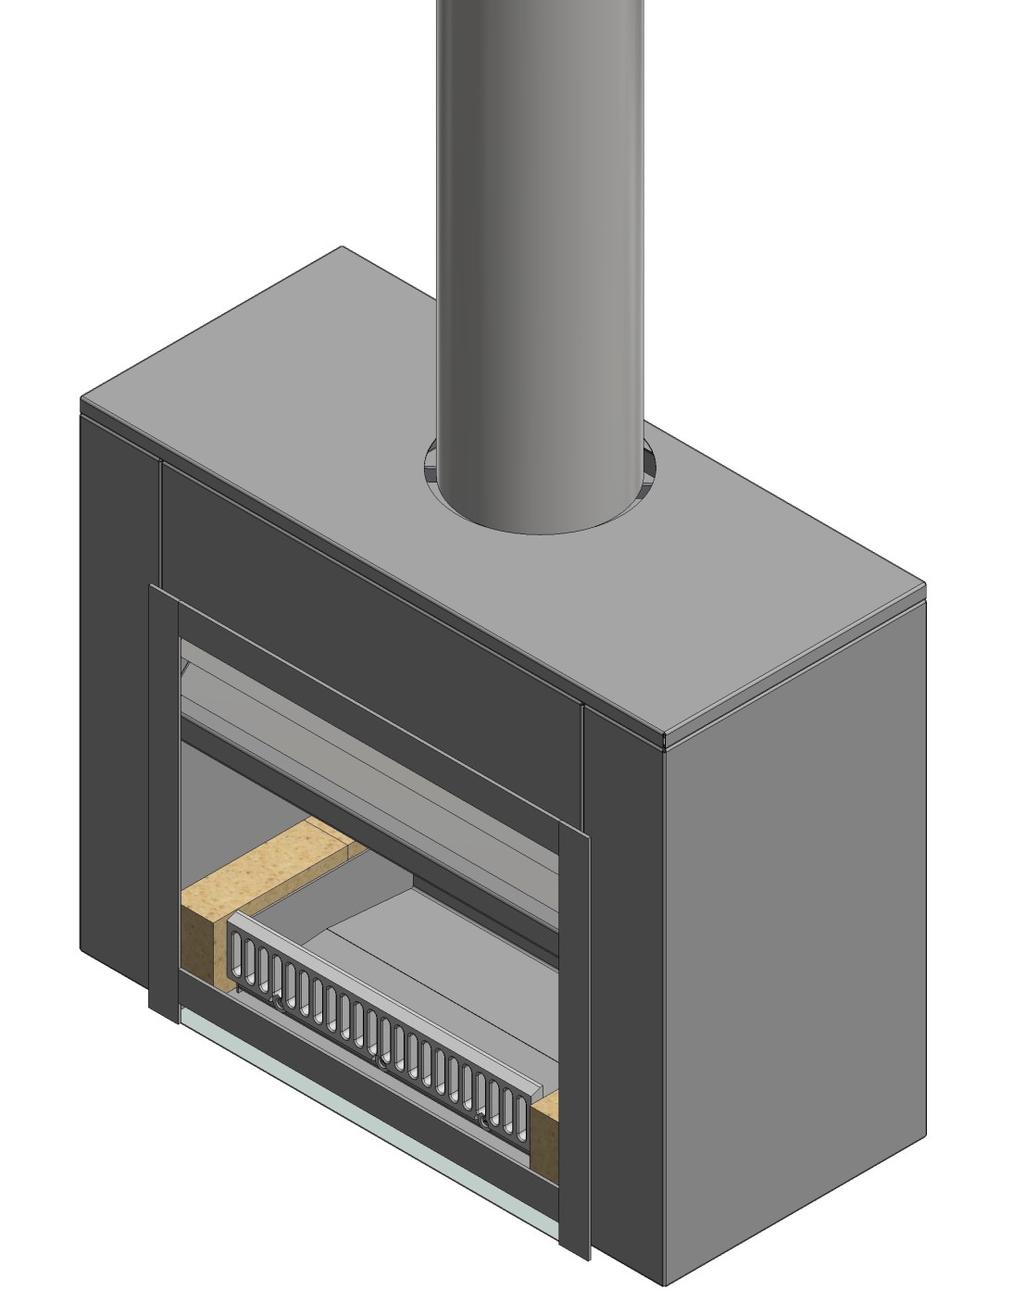 SI 440-600-700-700T-780-780T-900-1100 FSS/FSTT Open Fire Freestanding Solid Fuel Burner - Indoor Open Wood Fire Available in Square Top or Taper Top Options Installation Instructions Note: Flue